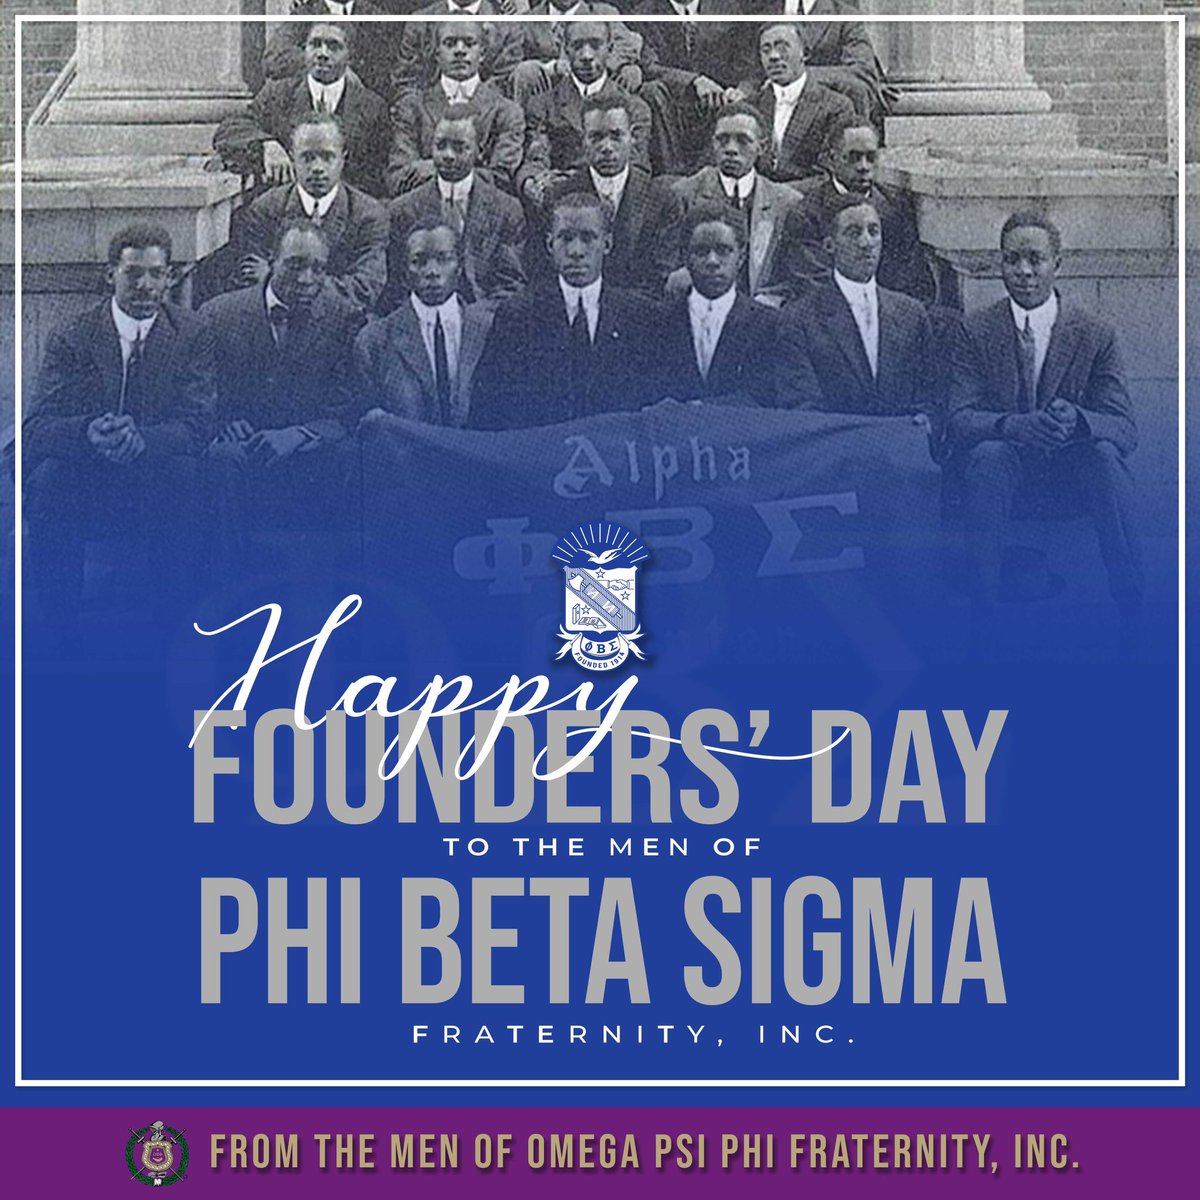 Happy Founder’s Day to the brothers of Phi Beta Sigma Fraternity, Inc., serving the community for 110 years.